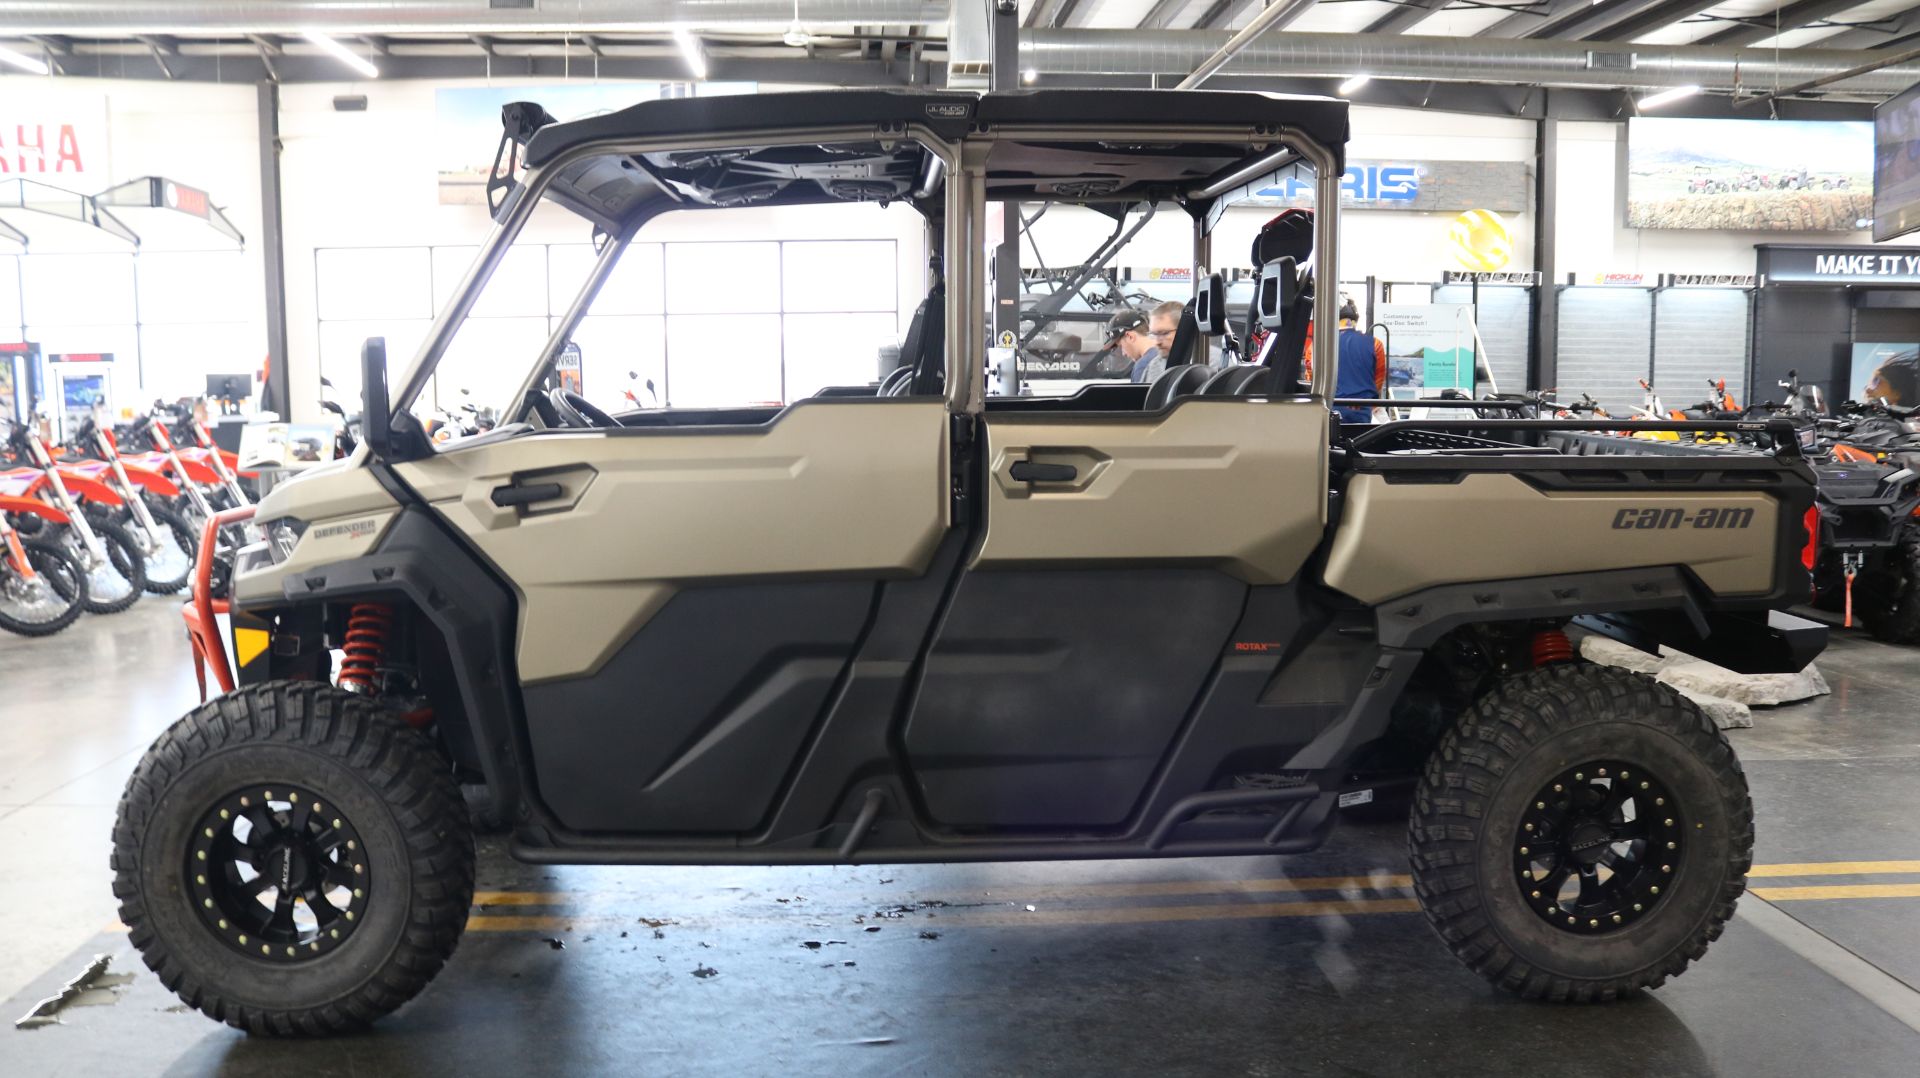 2023 Can-Am Defender MAX X MR With Half Doors HD10 in Grimes, Iowa - Photo 6